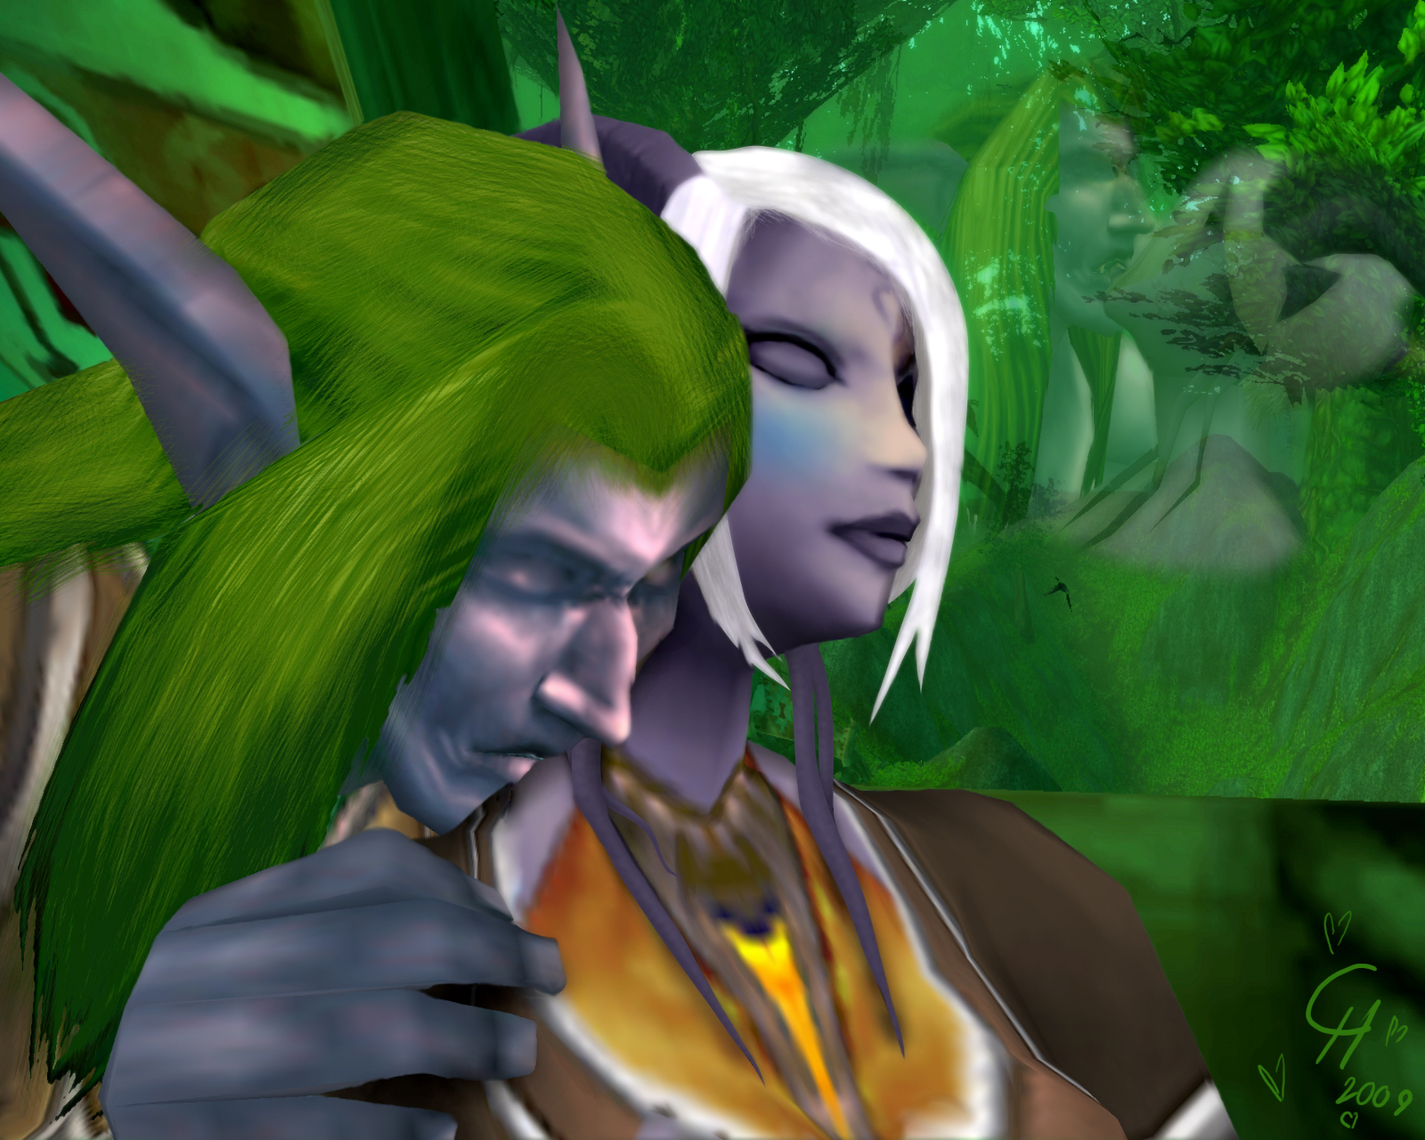 Comfort of Warmth [Draenei/Nelf/SFW]
Selanaar and Falathorn had a small history together,
even if Sel didn't wish to get steady with him because of
religius and racial reasons, she couldn't hold herself down and think about Falathorn,
all those evenings spent together and passionated moments together kept her warm even if she was away.
Keywords: Draenei;Nelf;SFW